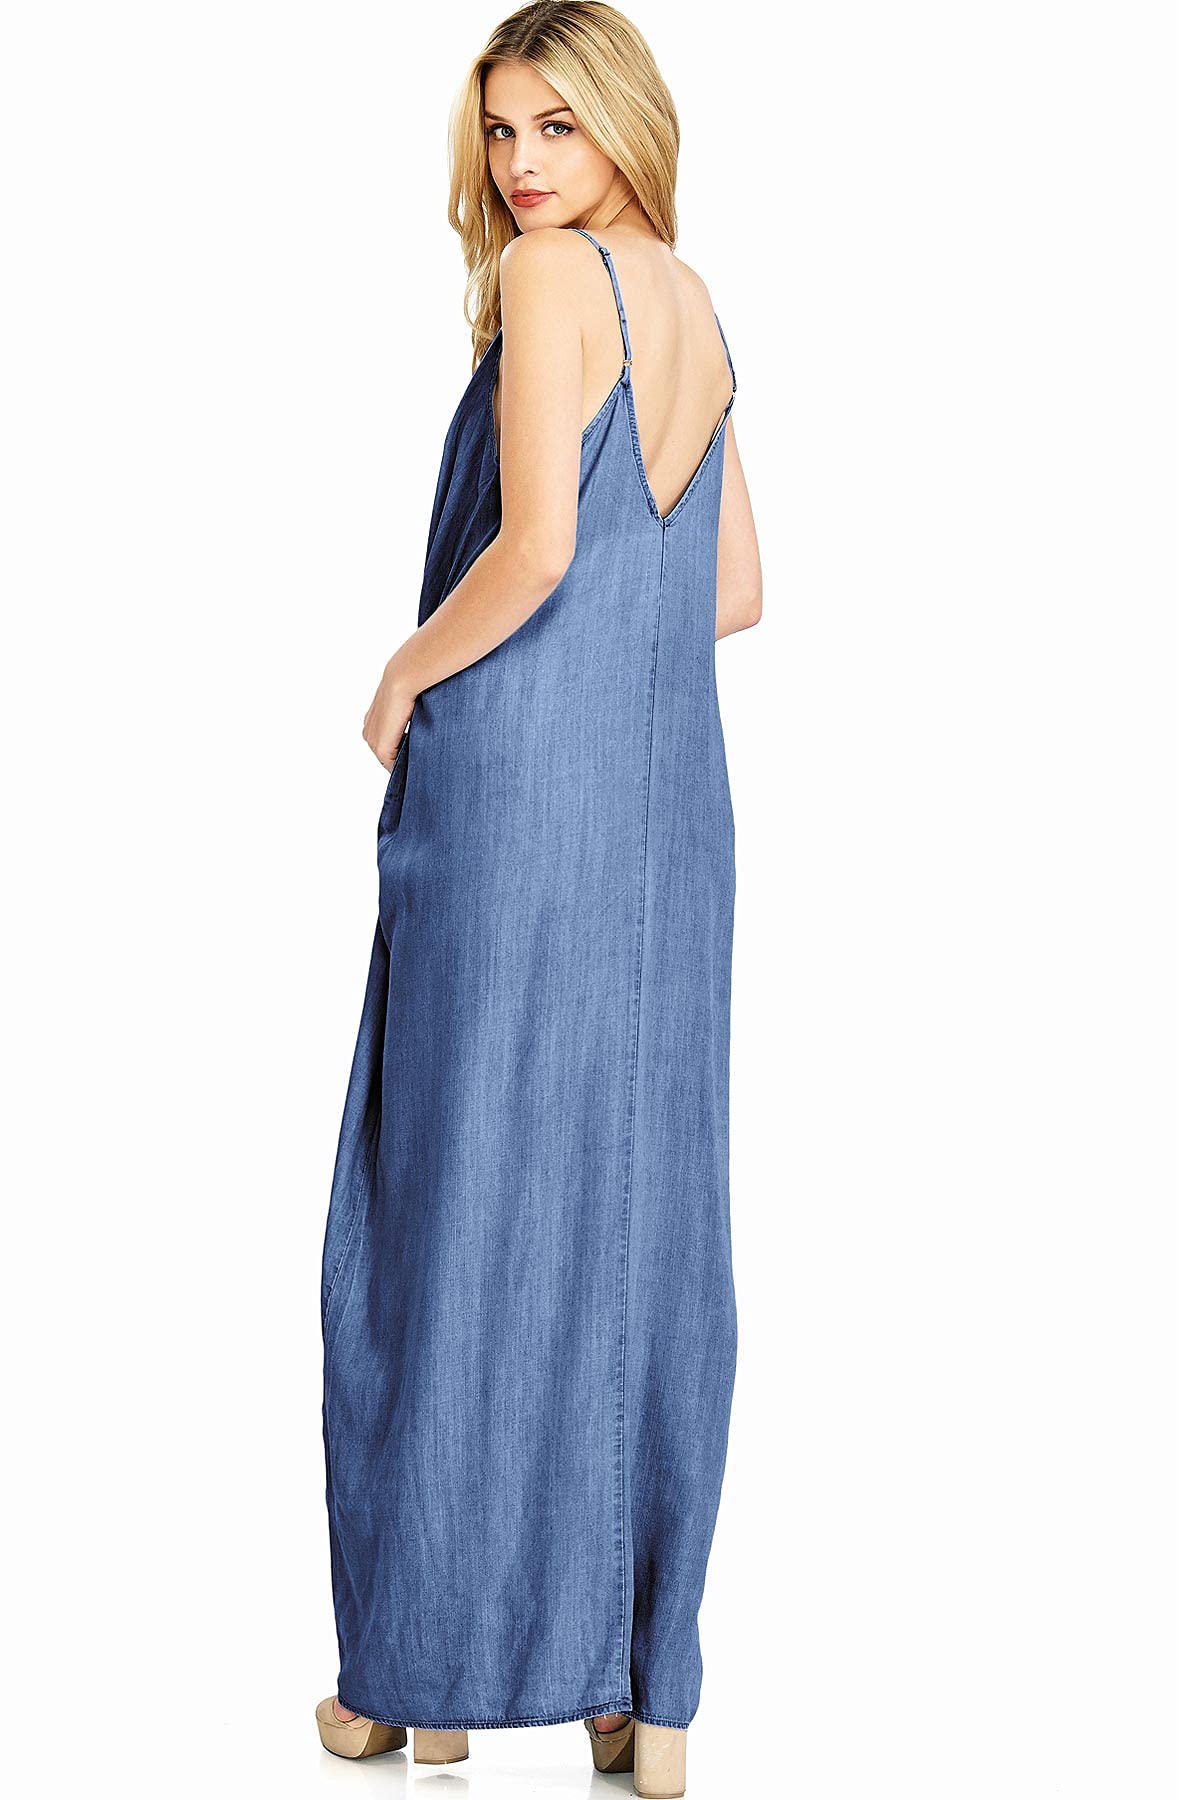 Spellbound Chambray Maxi Dress